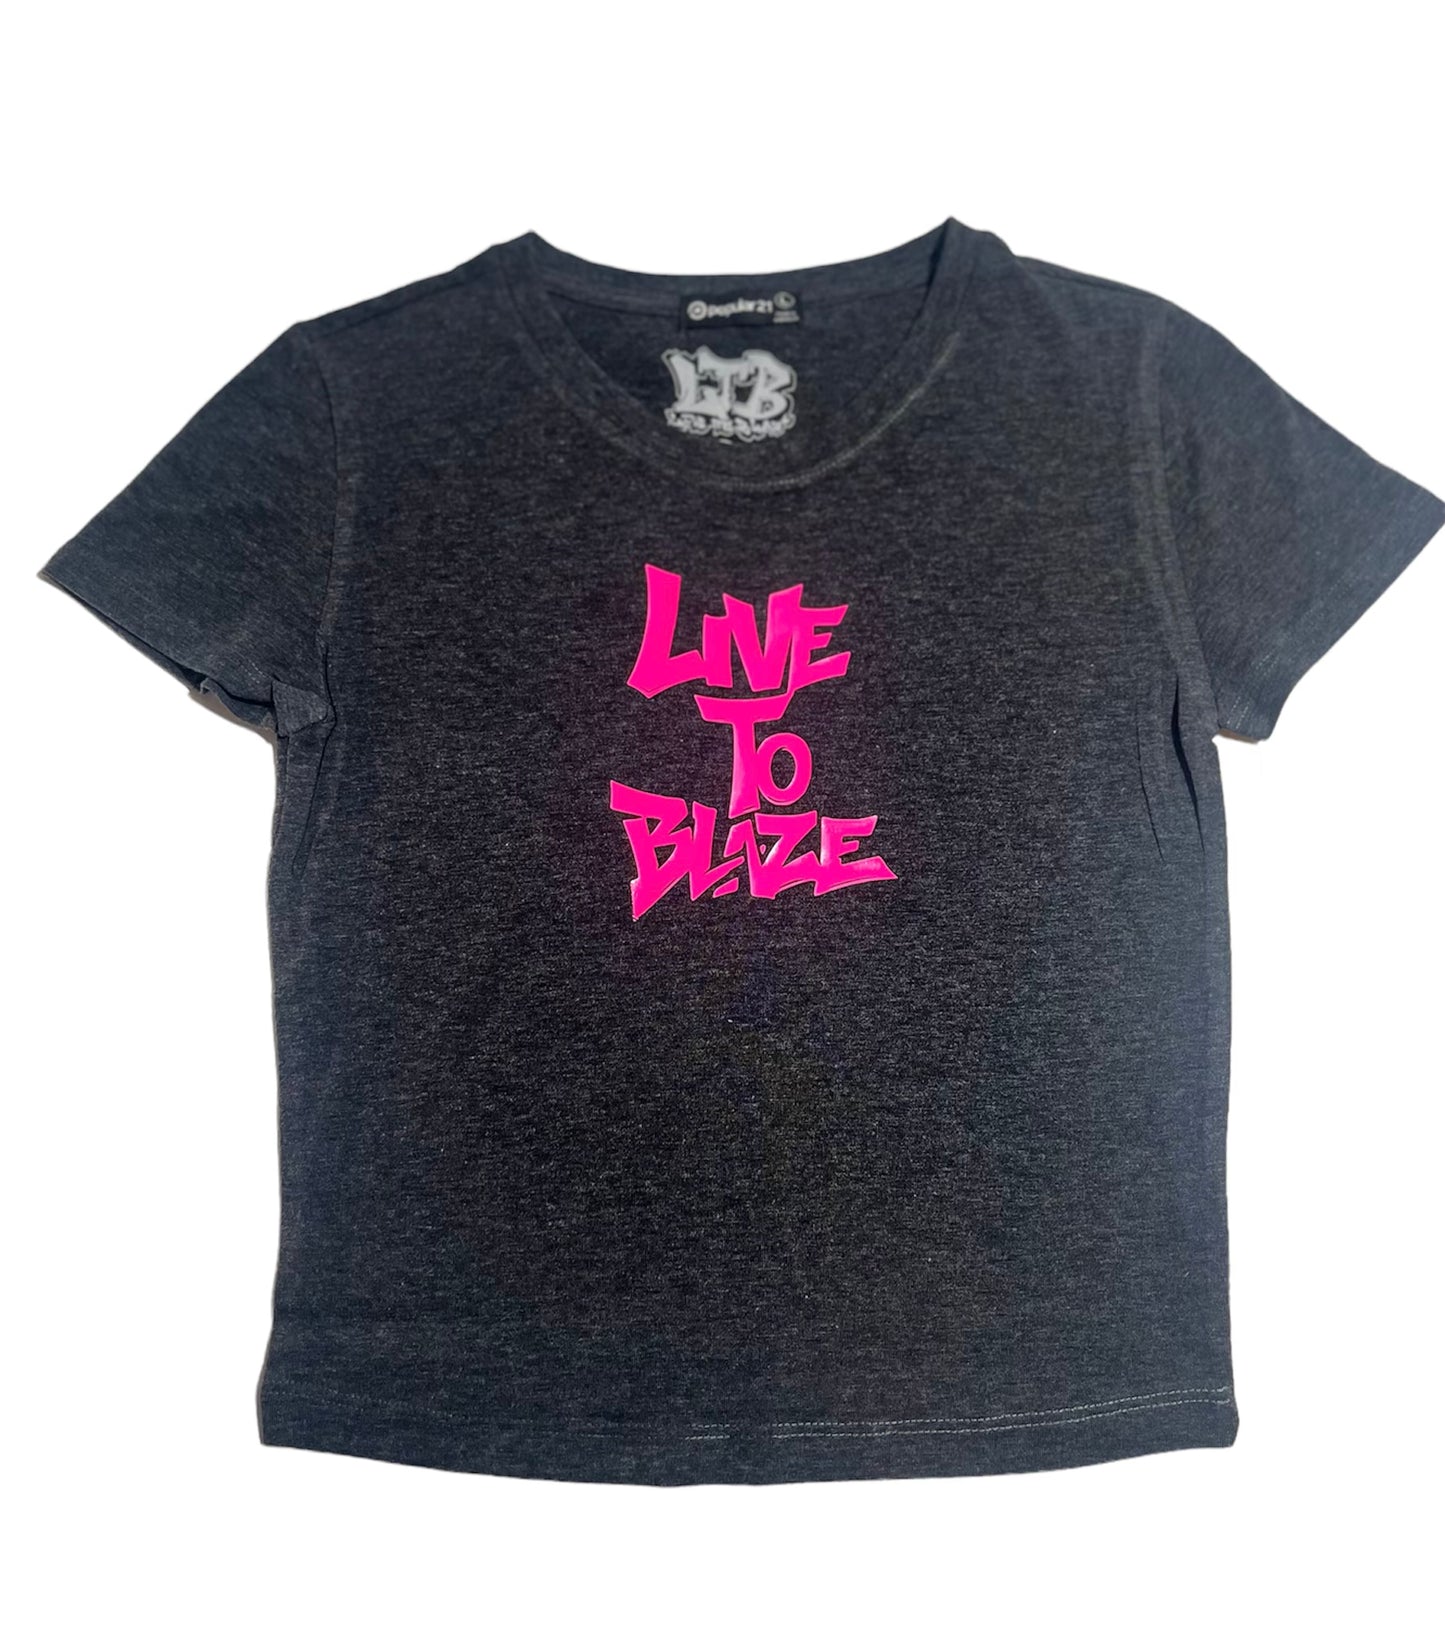 Woman Crop Top 2nd Edition LTB Pink & Black